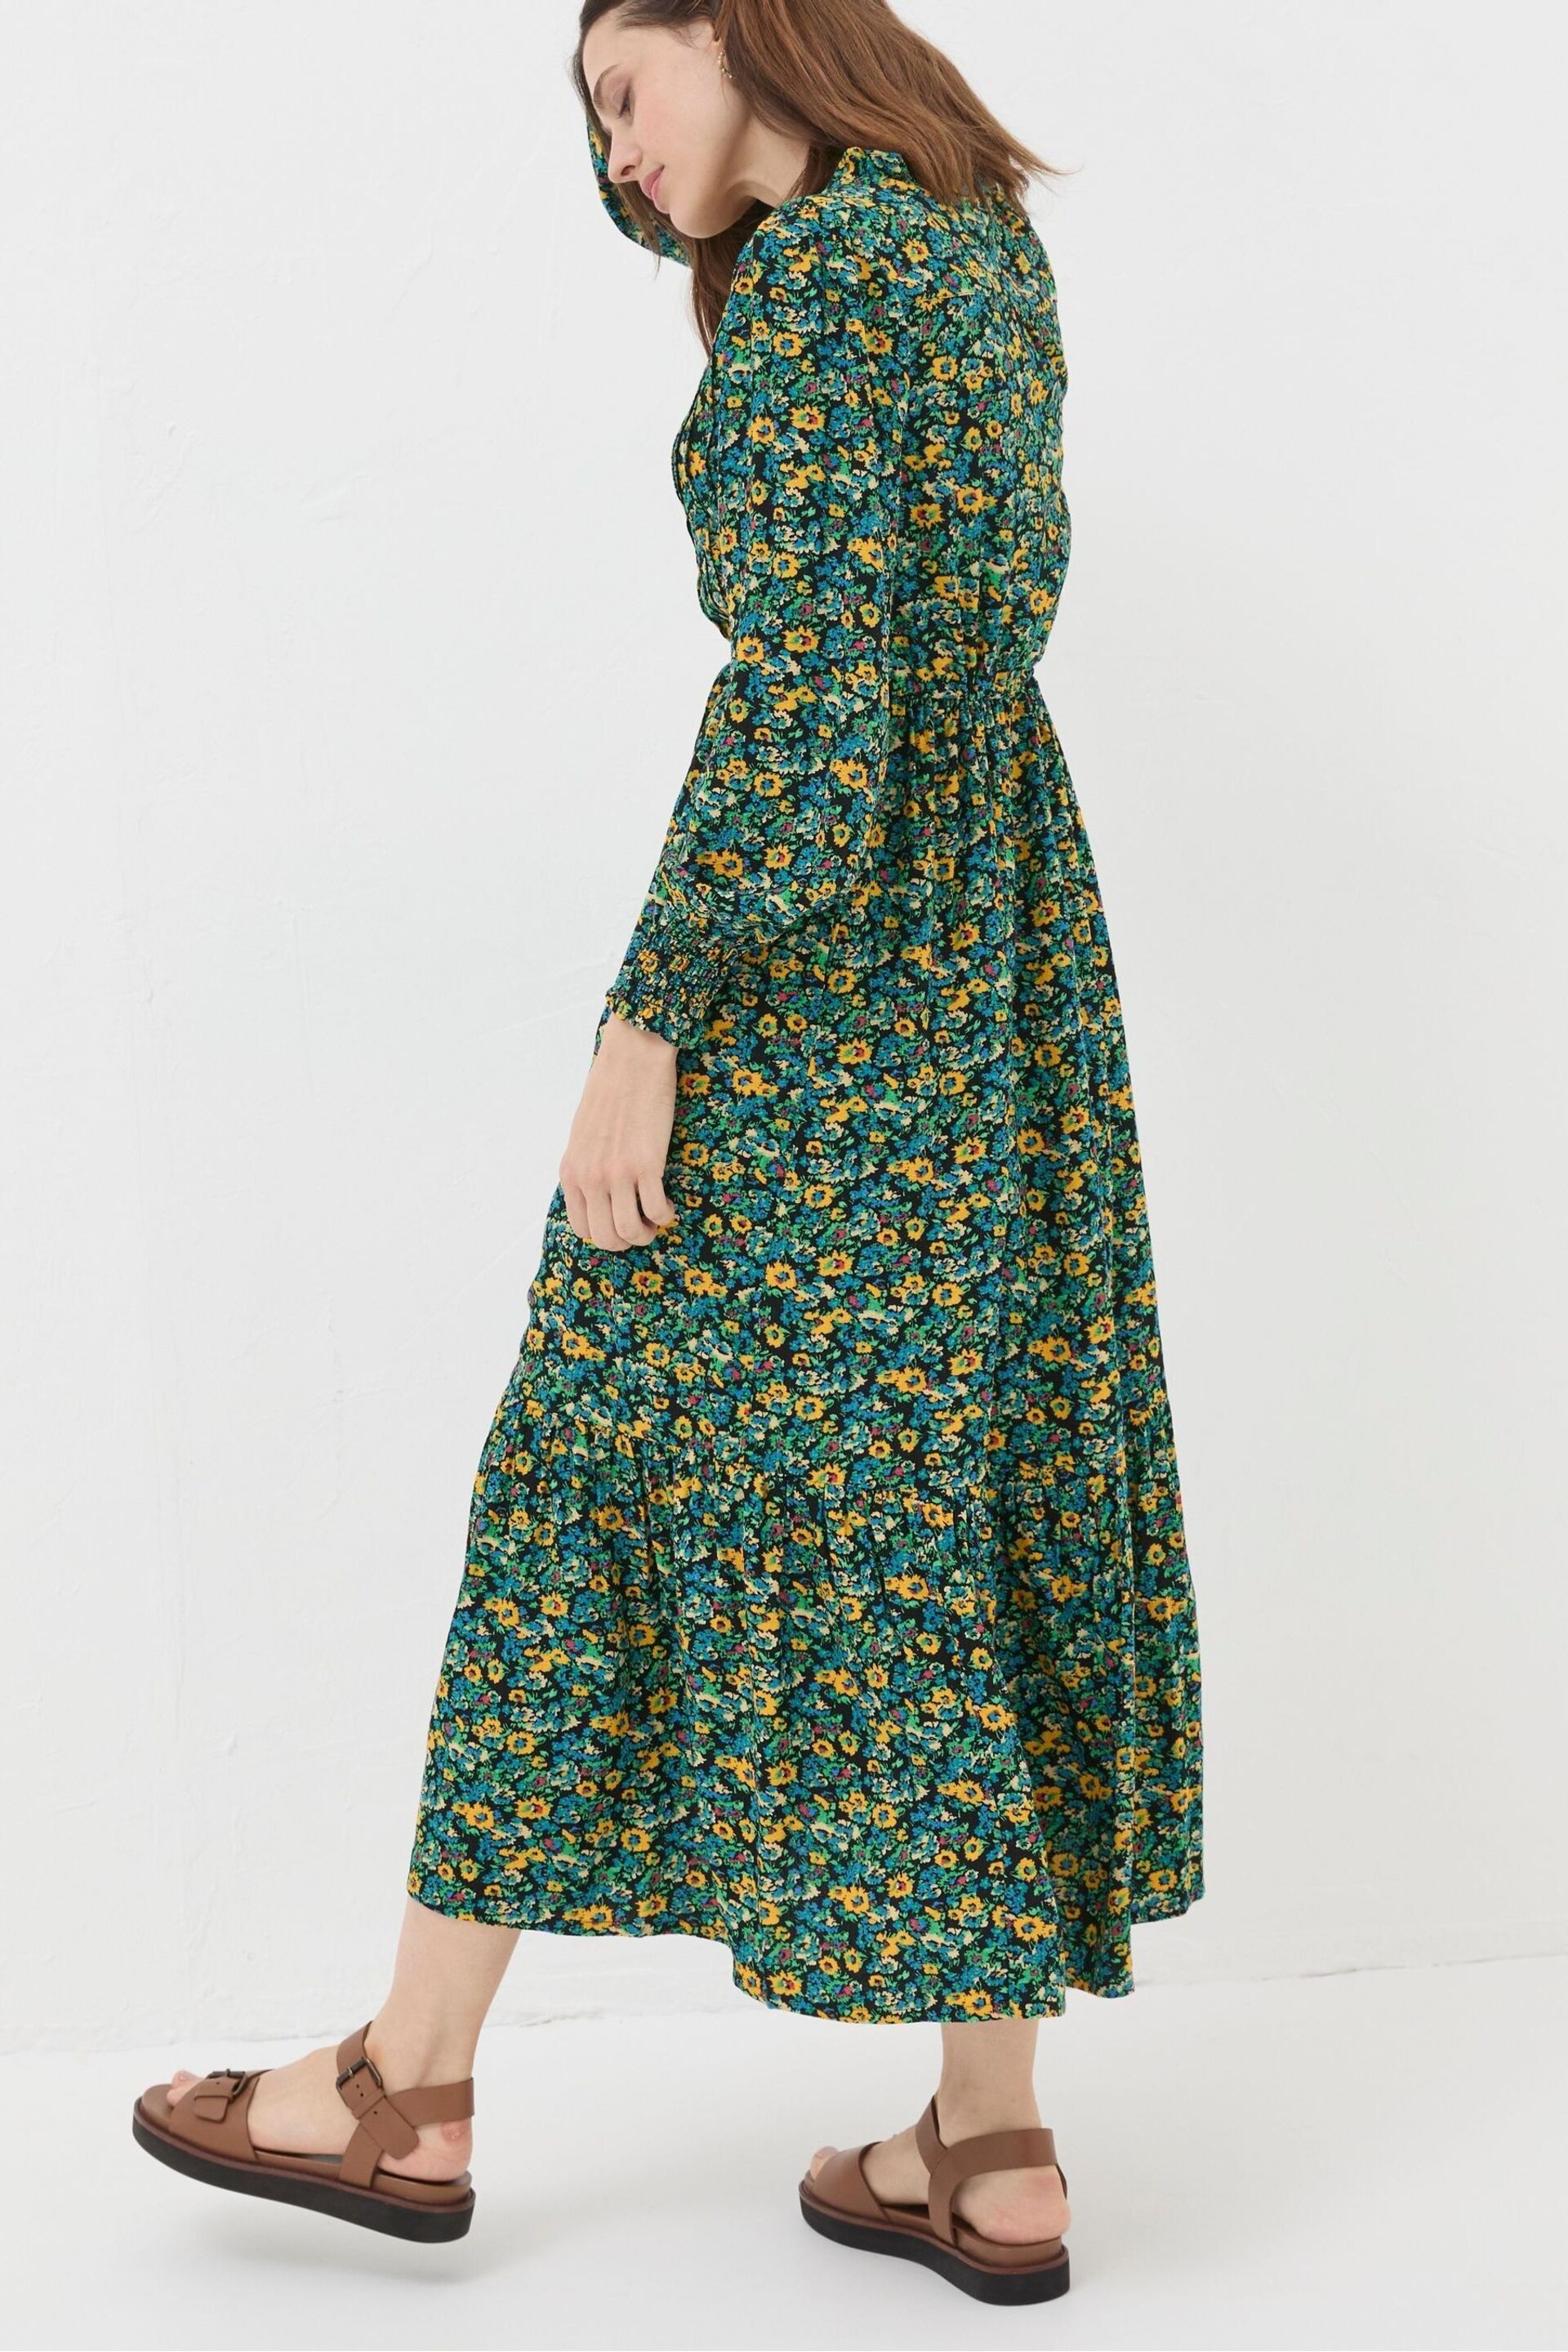 FatFace Green Spring Floral Maxi Dress - Image 2 of 4